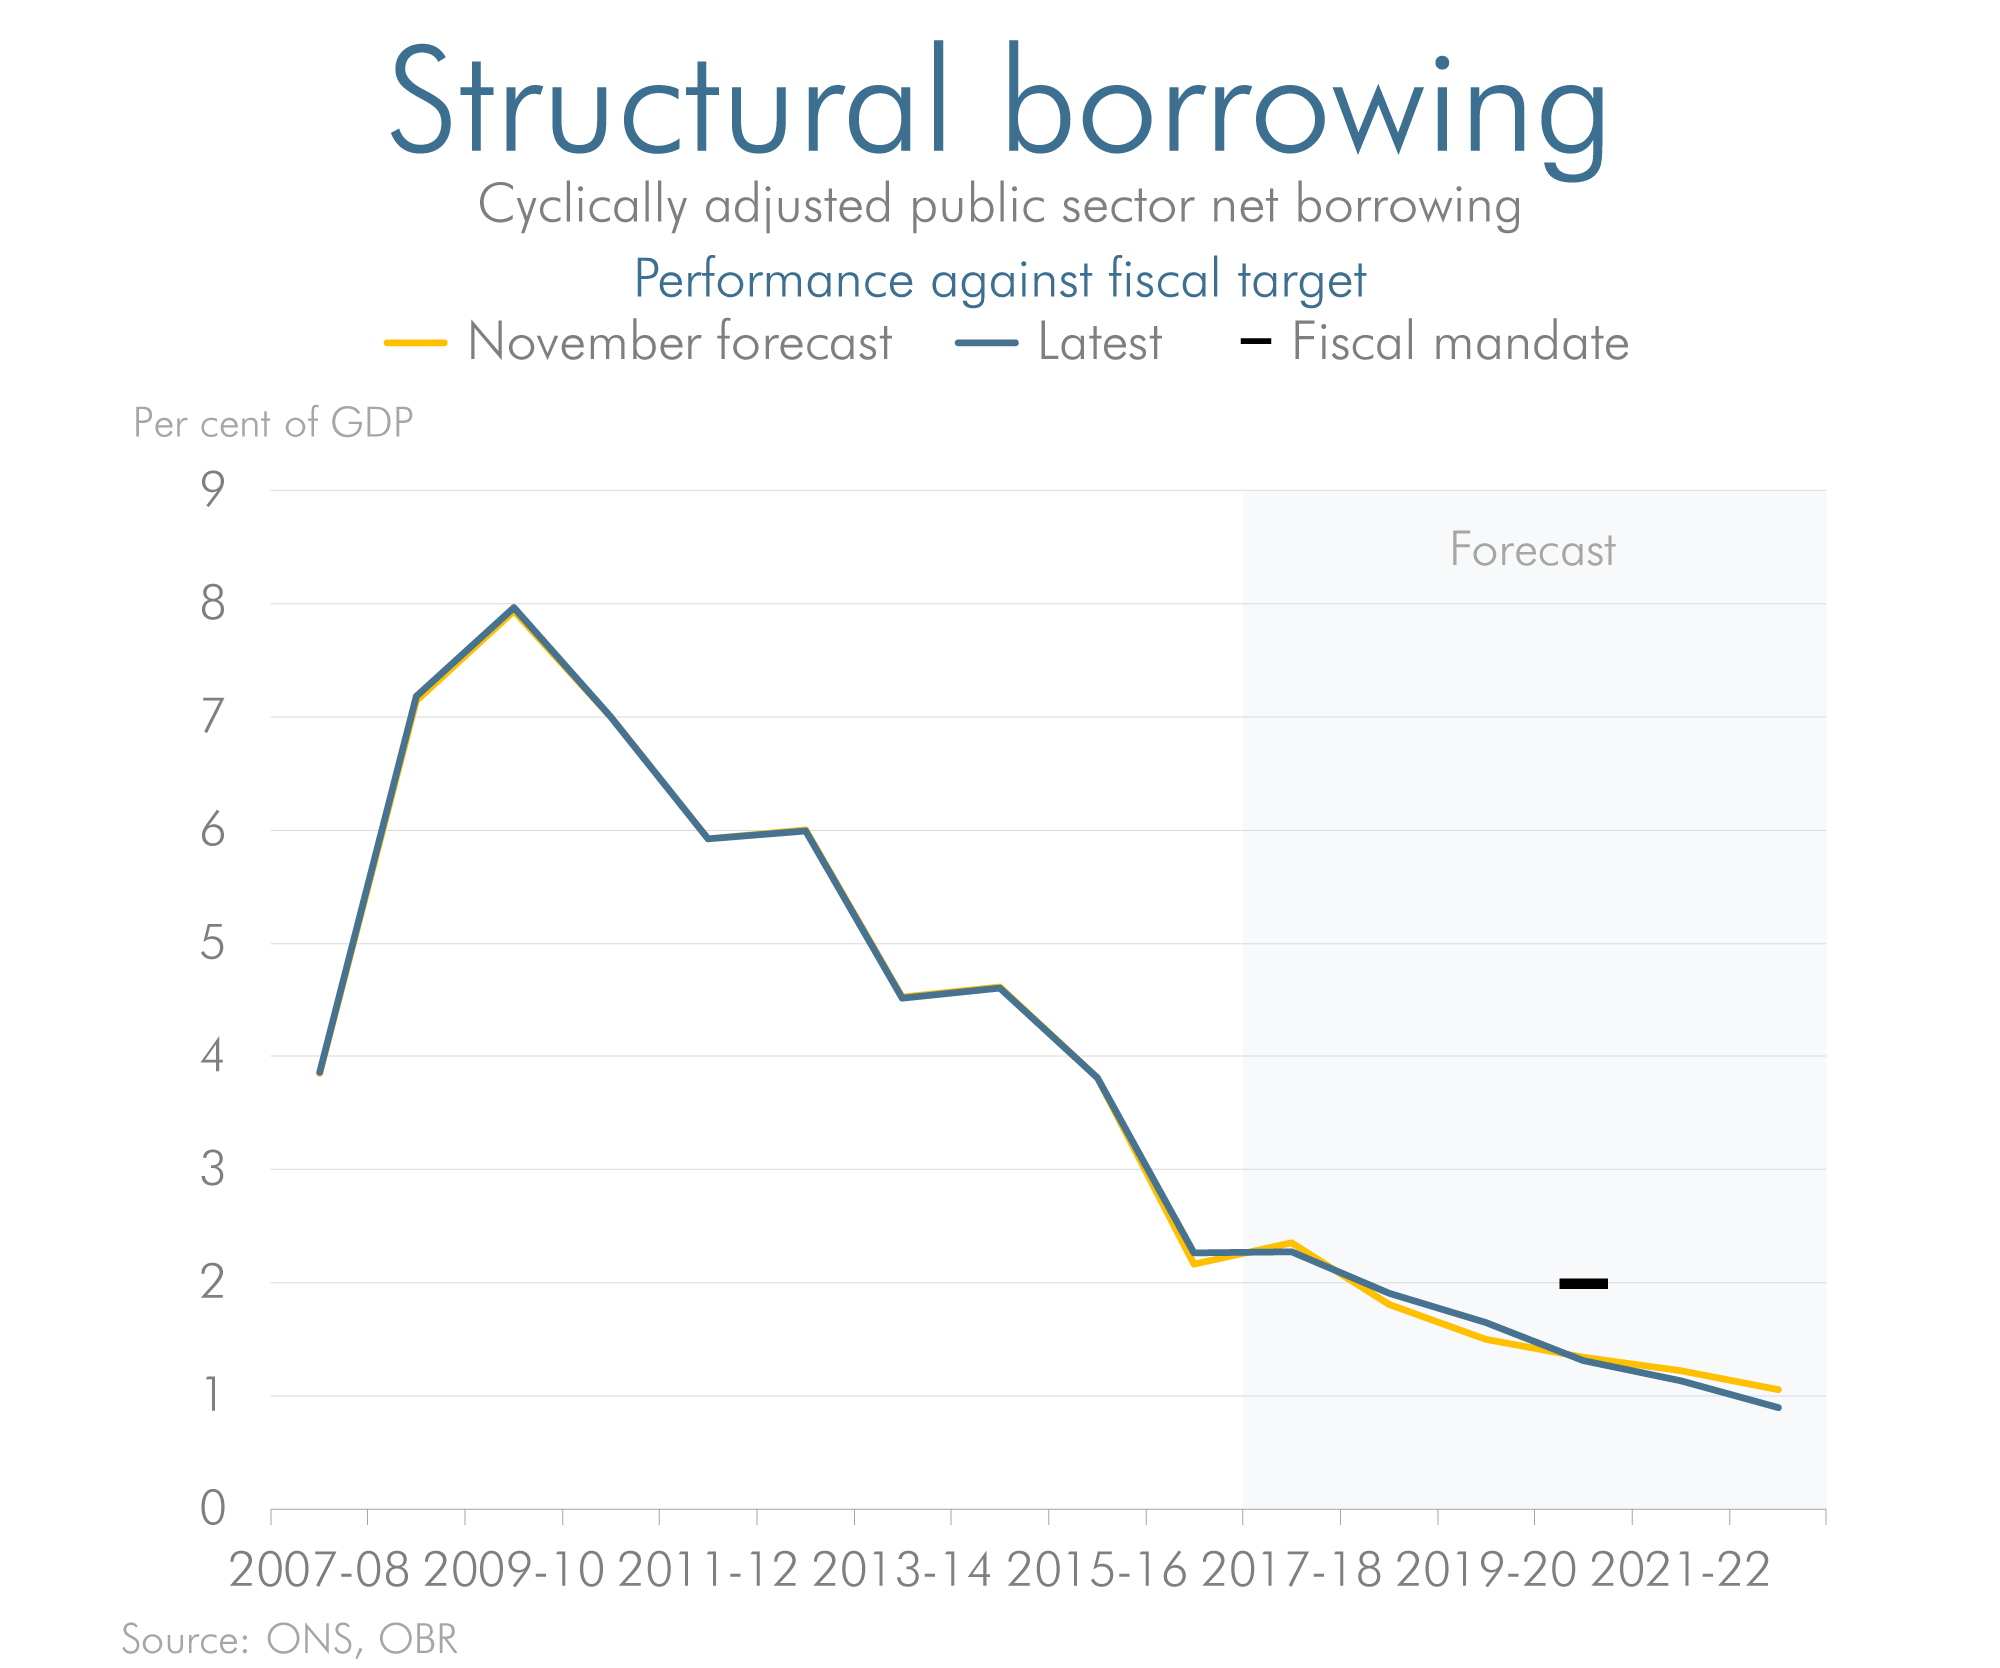 Latest forecast versus previous forecast for structural borrowing